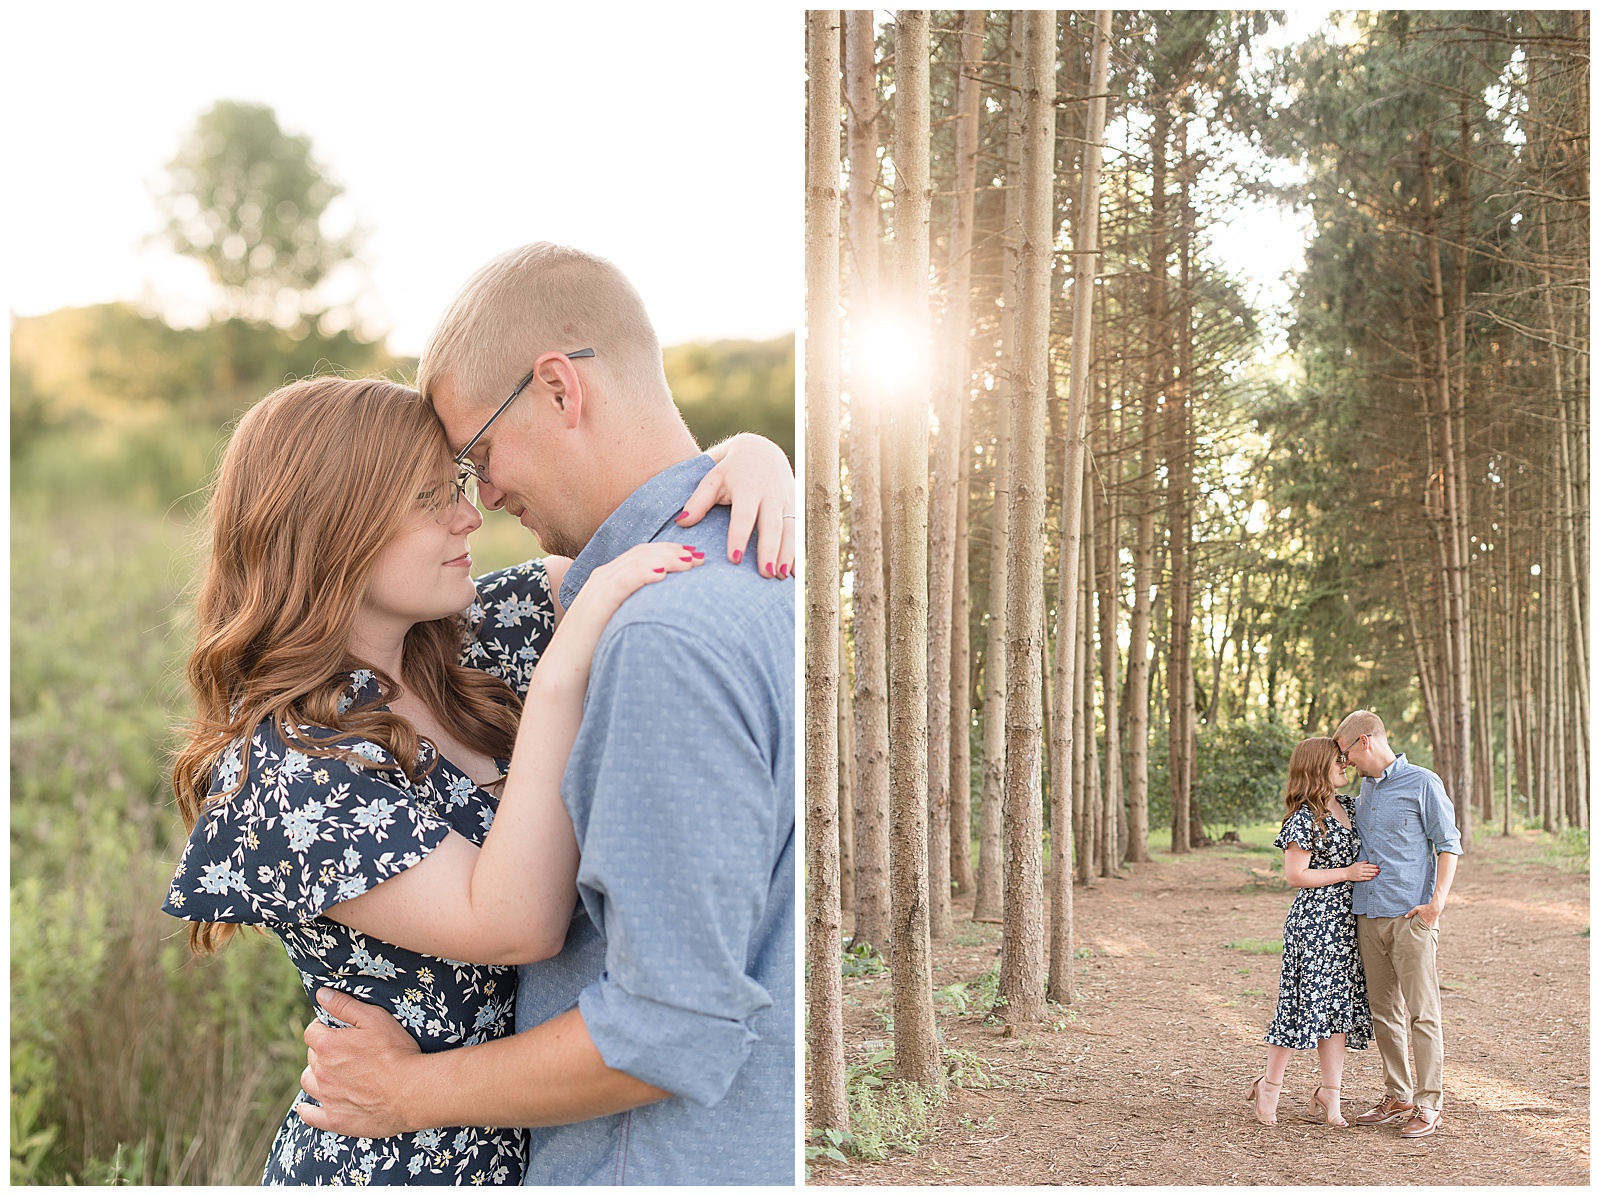 Engagement Session at Overlook Park in Lancaster, PA